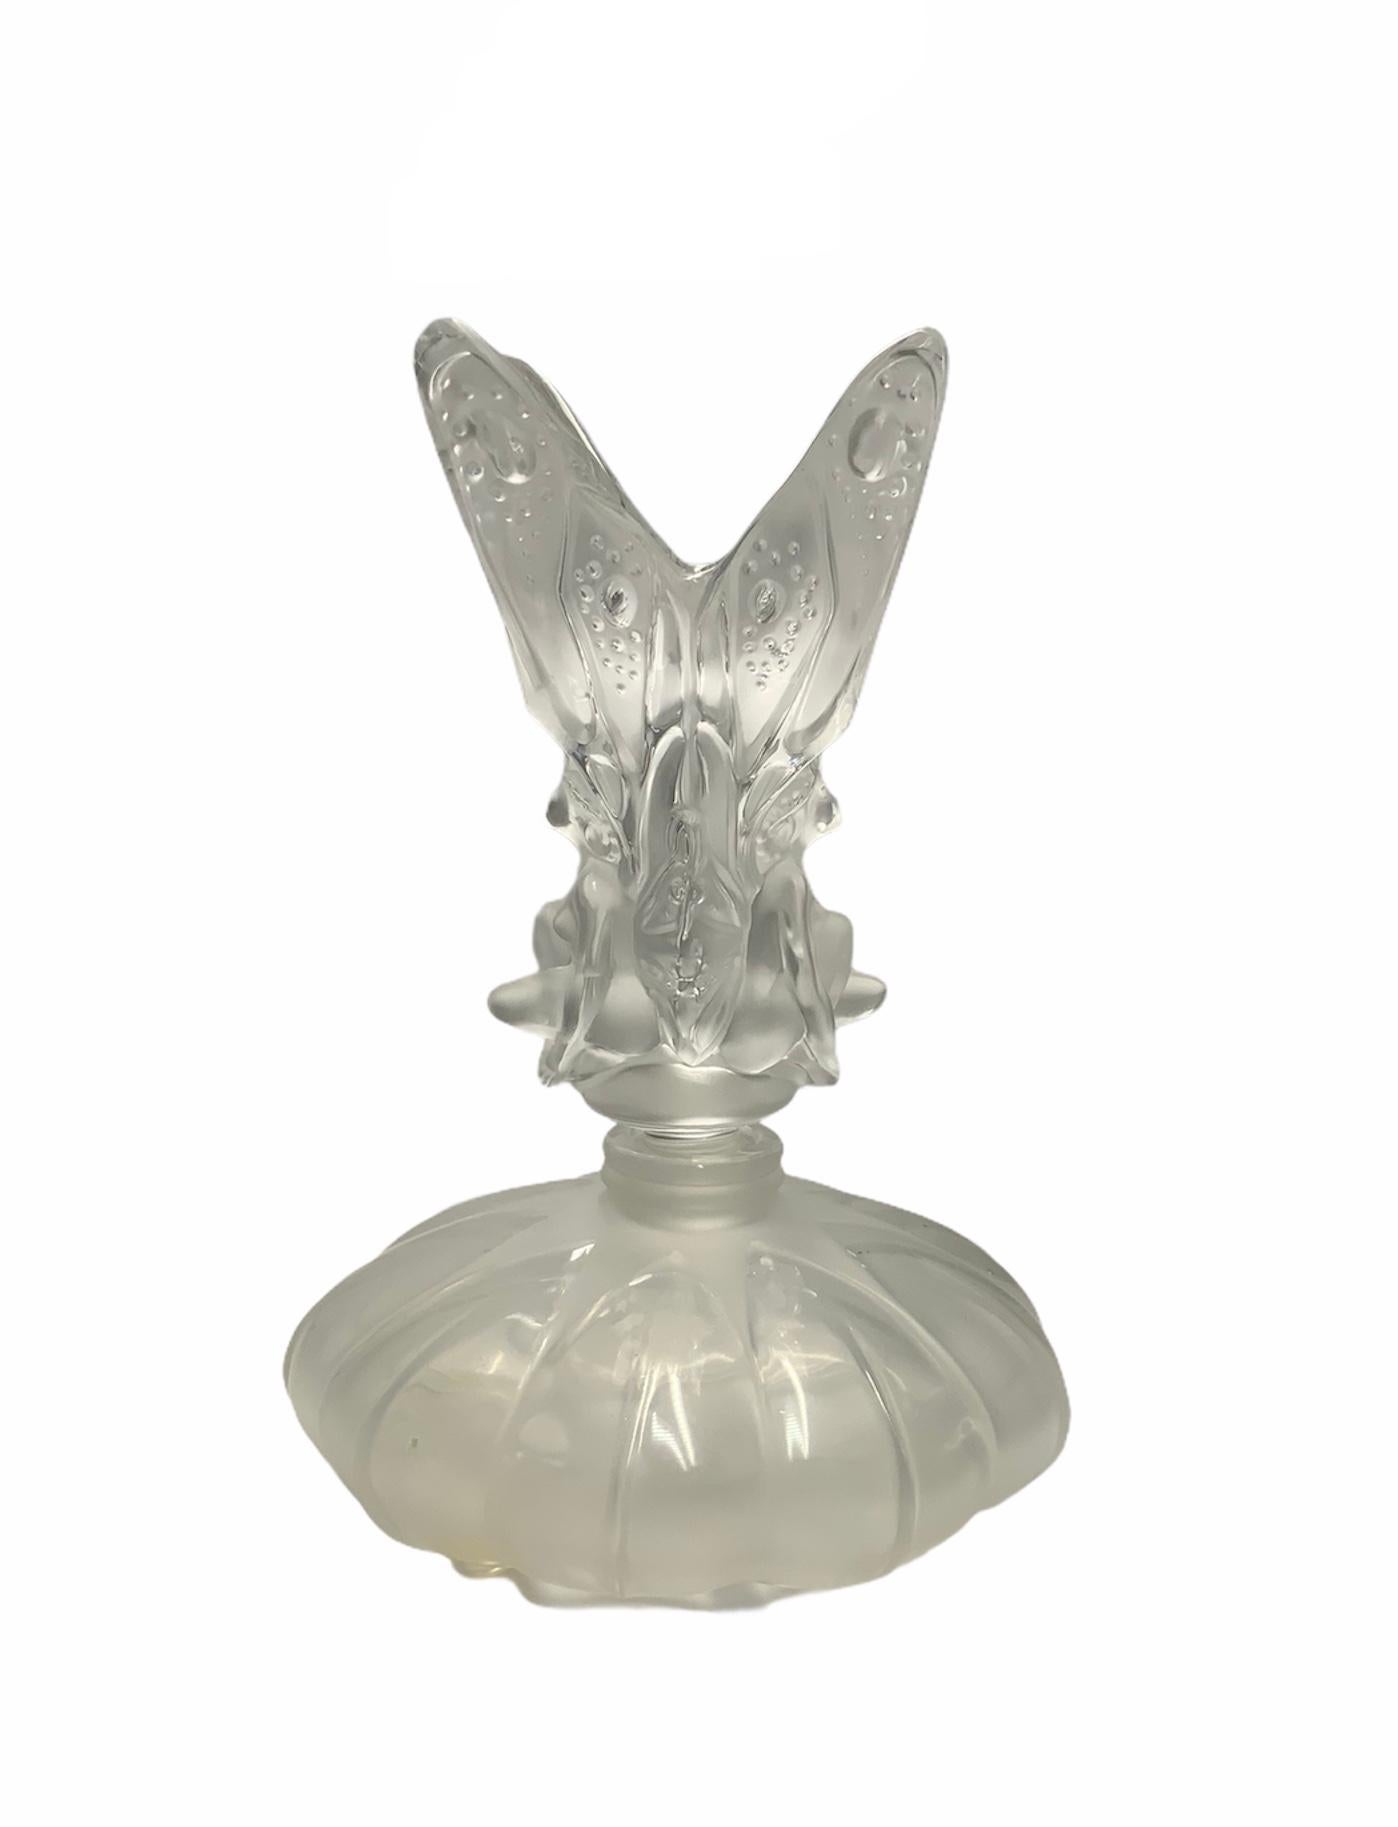 Contemporary Lalique Crystal “Les Fees” 'The Fairy' Perfume Bottle